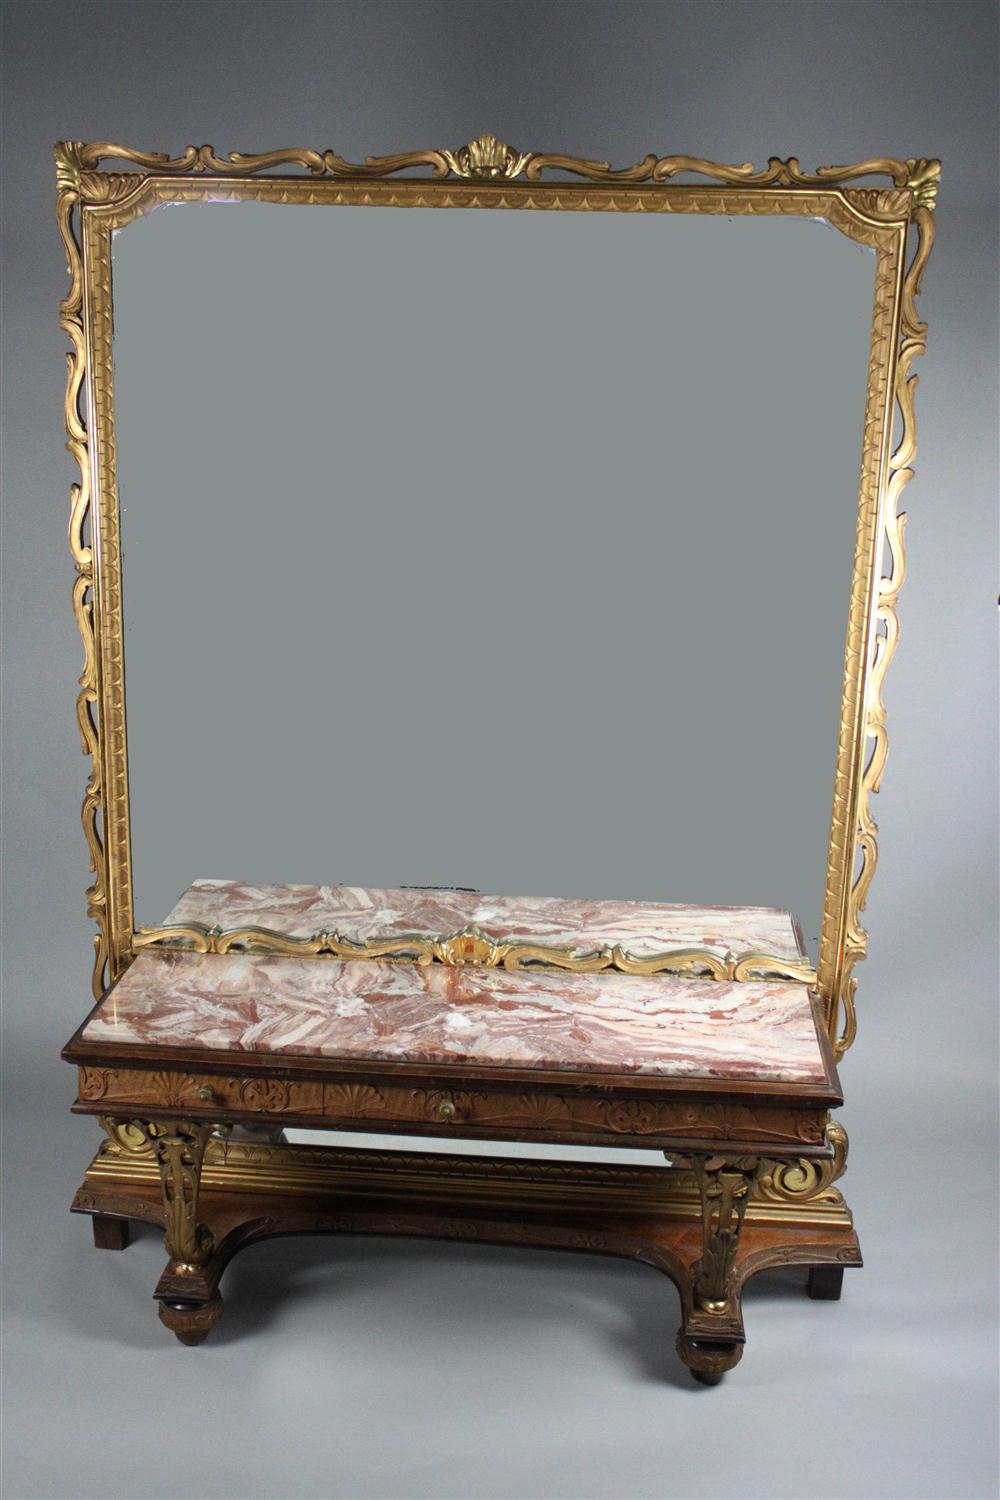 MONUMENTAL HALL MIRROR AND ATTACHED